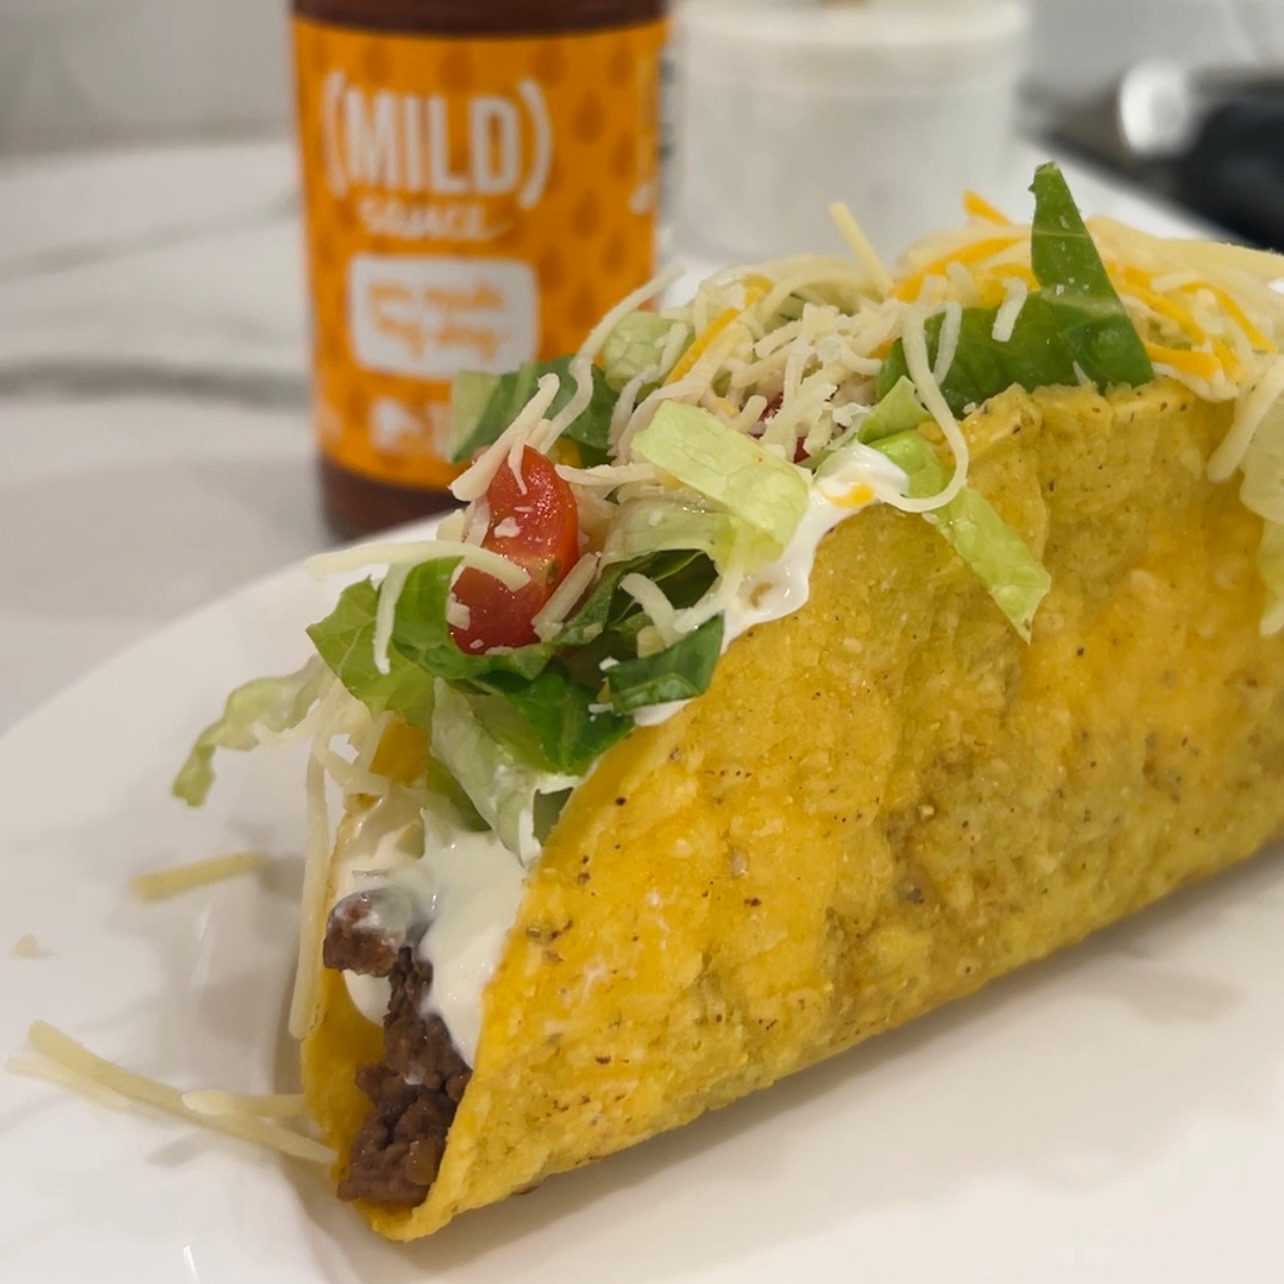 3 Ingredient Taco Bell Meat